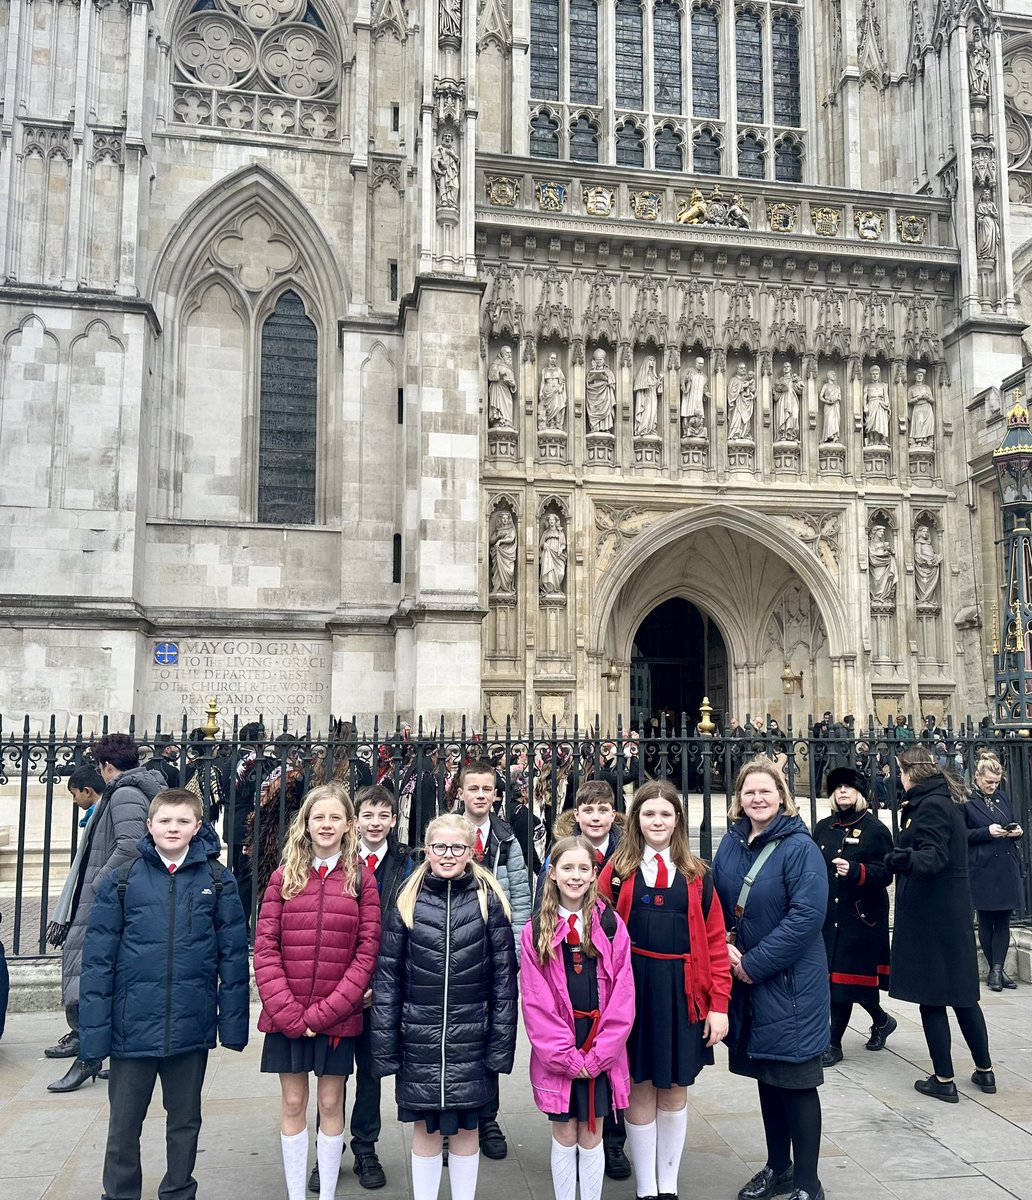 The Irish Society’s Primary School were honoured to be invited to celebrate #CommonwealthDay Service in Westminster Abbey yesterday. Pupils representing the school watched on as HM The King addressed about 2,000 guests from the UK and Commonwealth, #commonwealthday2023